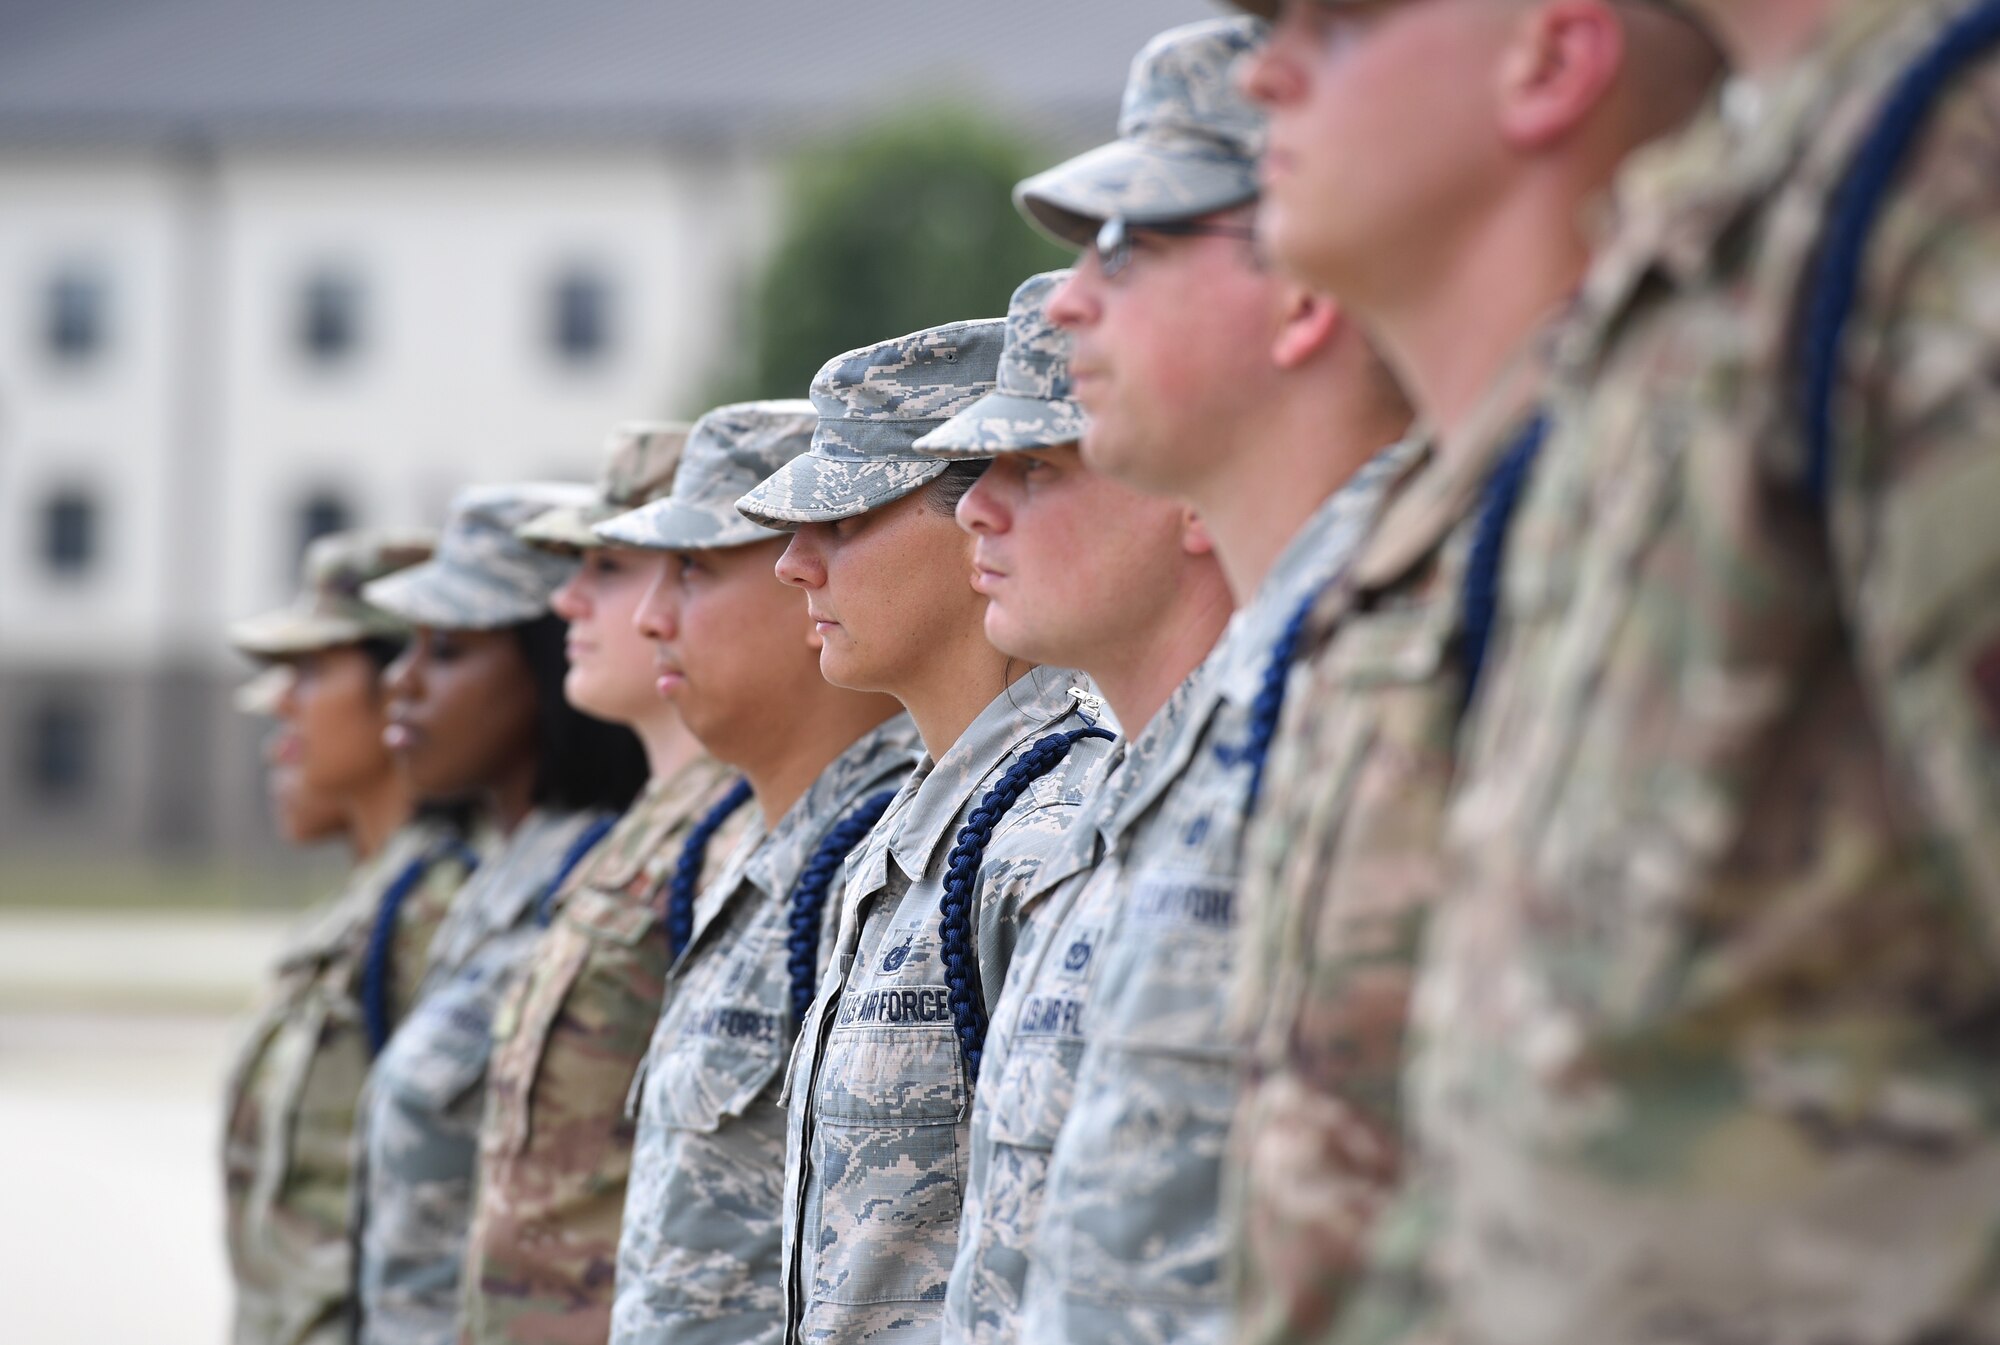 Airmen stand in formation during a Military Training Leader course graduation ceremony at the Levitow Training Support Facility on Keesler Air Force Base, Mississippi, May 30. The MTL course is responsible for training approximately 120 MTLs per year. Those MTLs are then responsible for training approximately 30,000 Airmen in 49 different locations that fall under Air Education and Training Command.